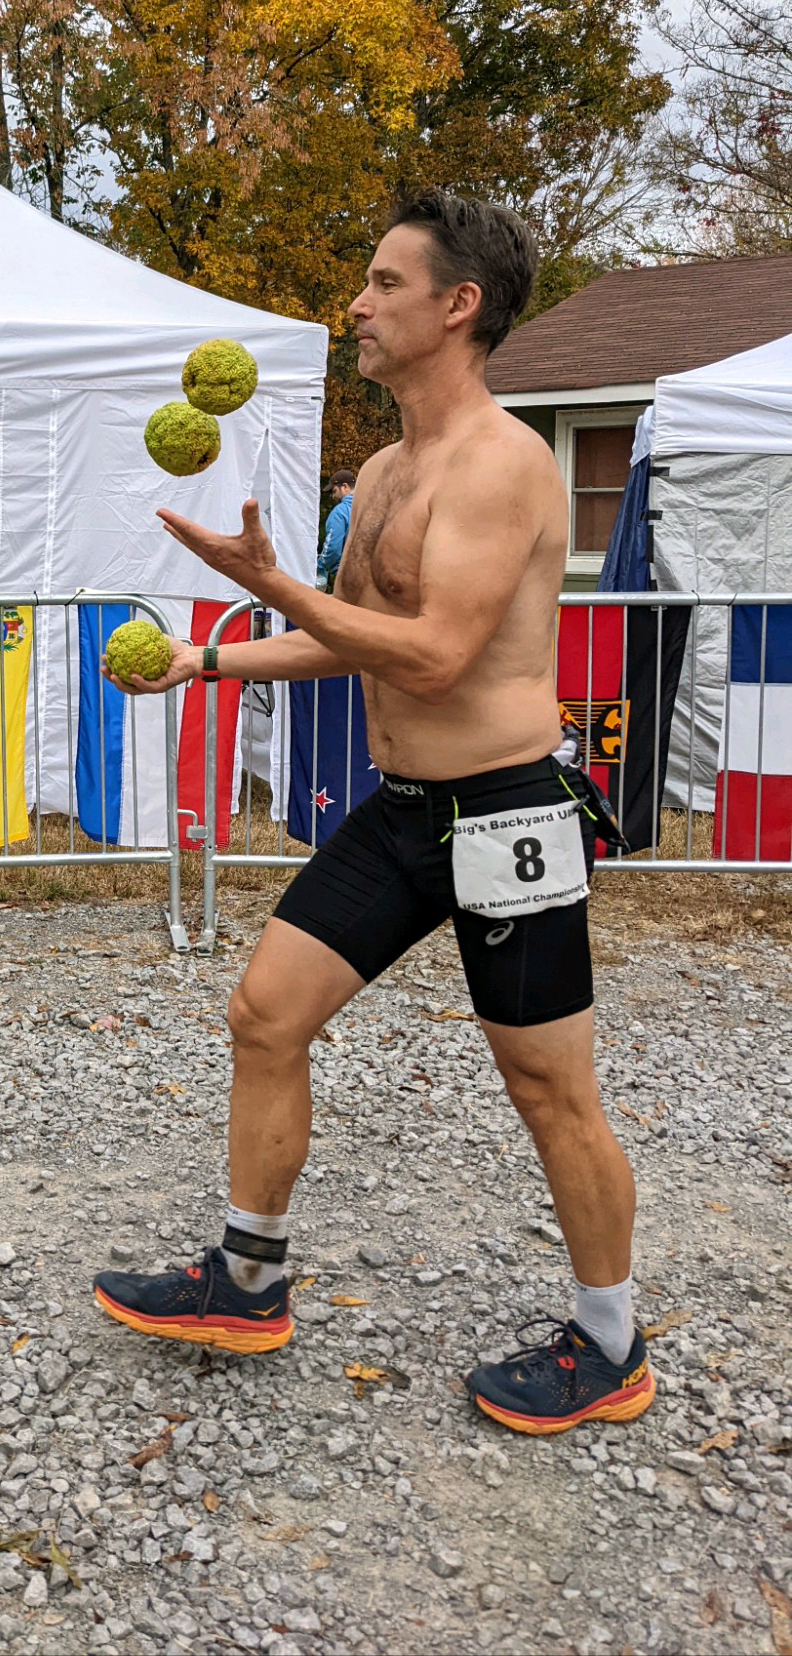 South Bristol School teacher Jason Bigonia juggles while competing for Team USA in the Big Dog's Backyard Ultra World Team Championship in Tennessee last weekend.  (Photo courtesy Erica Qualey)